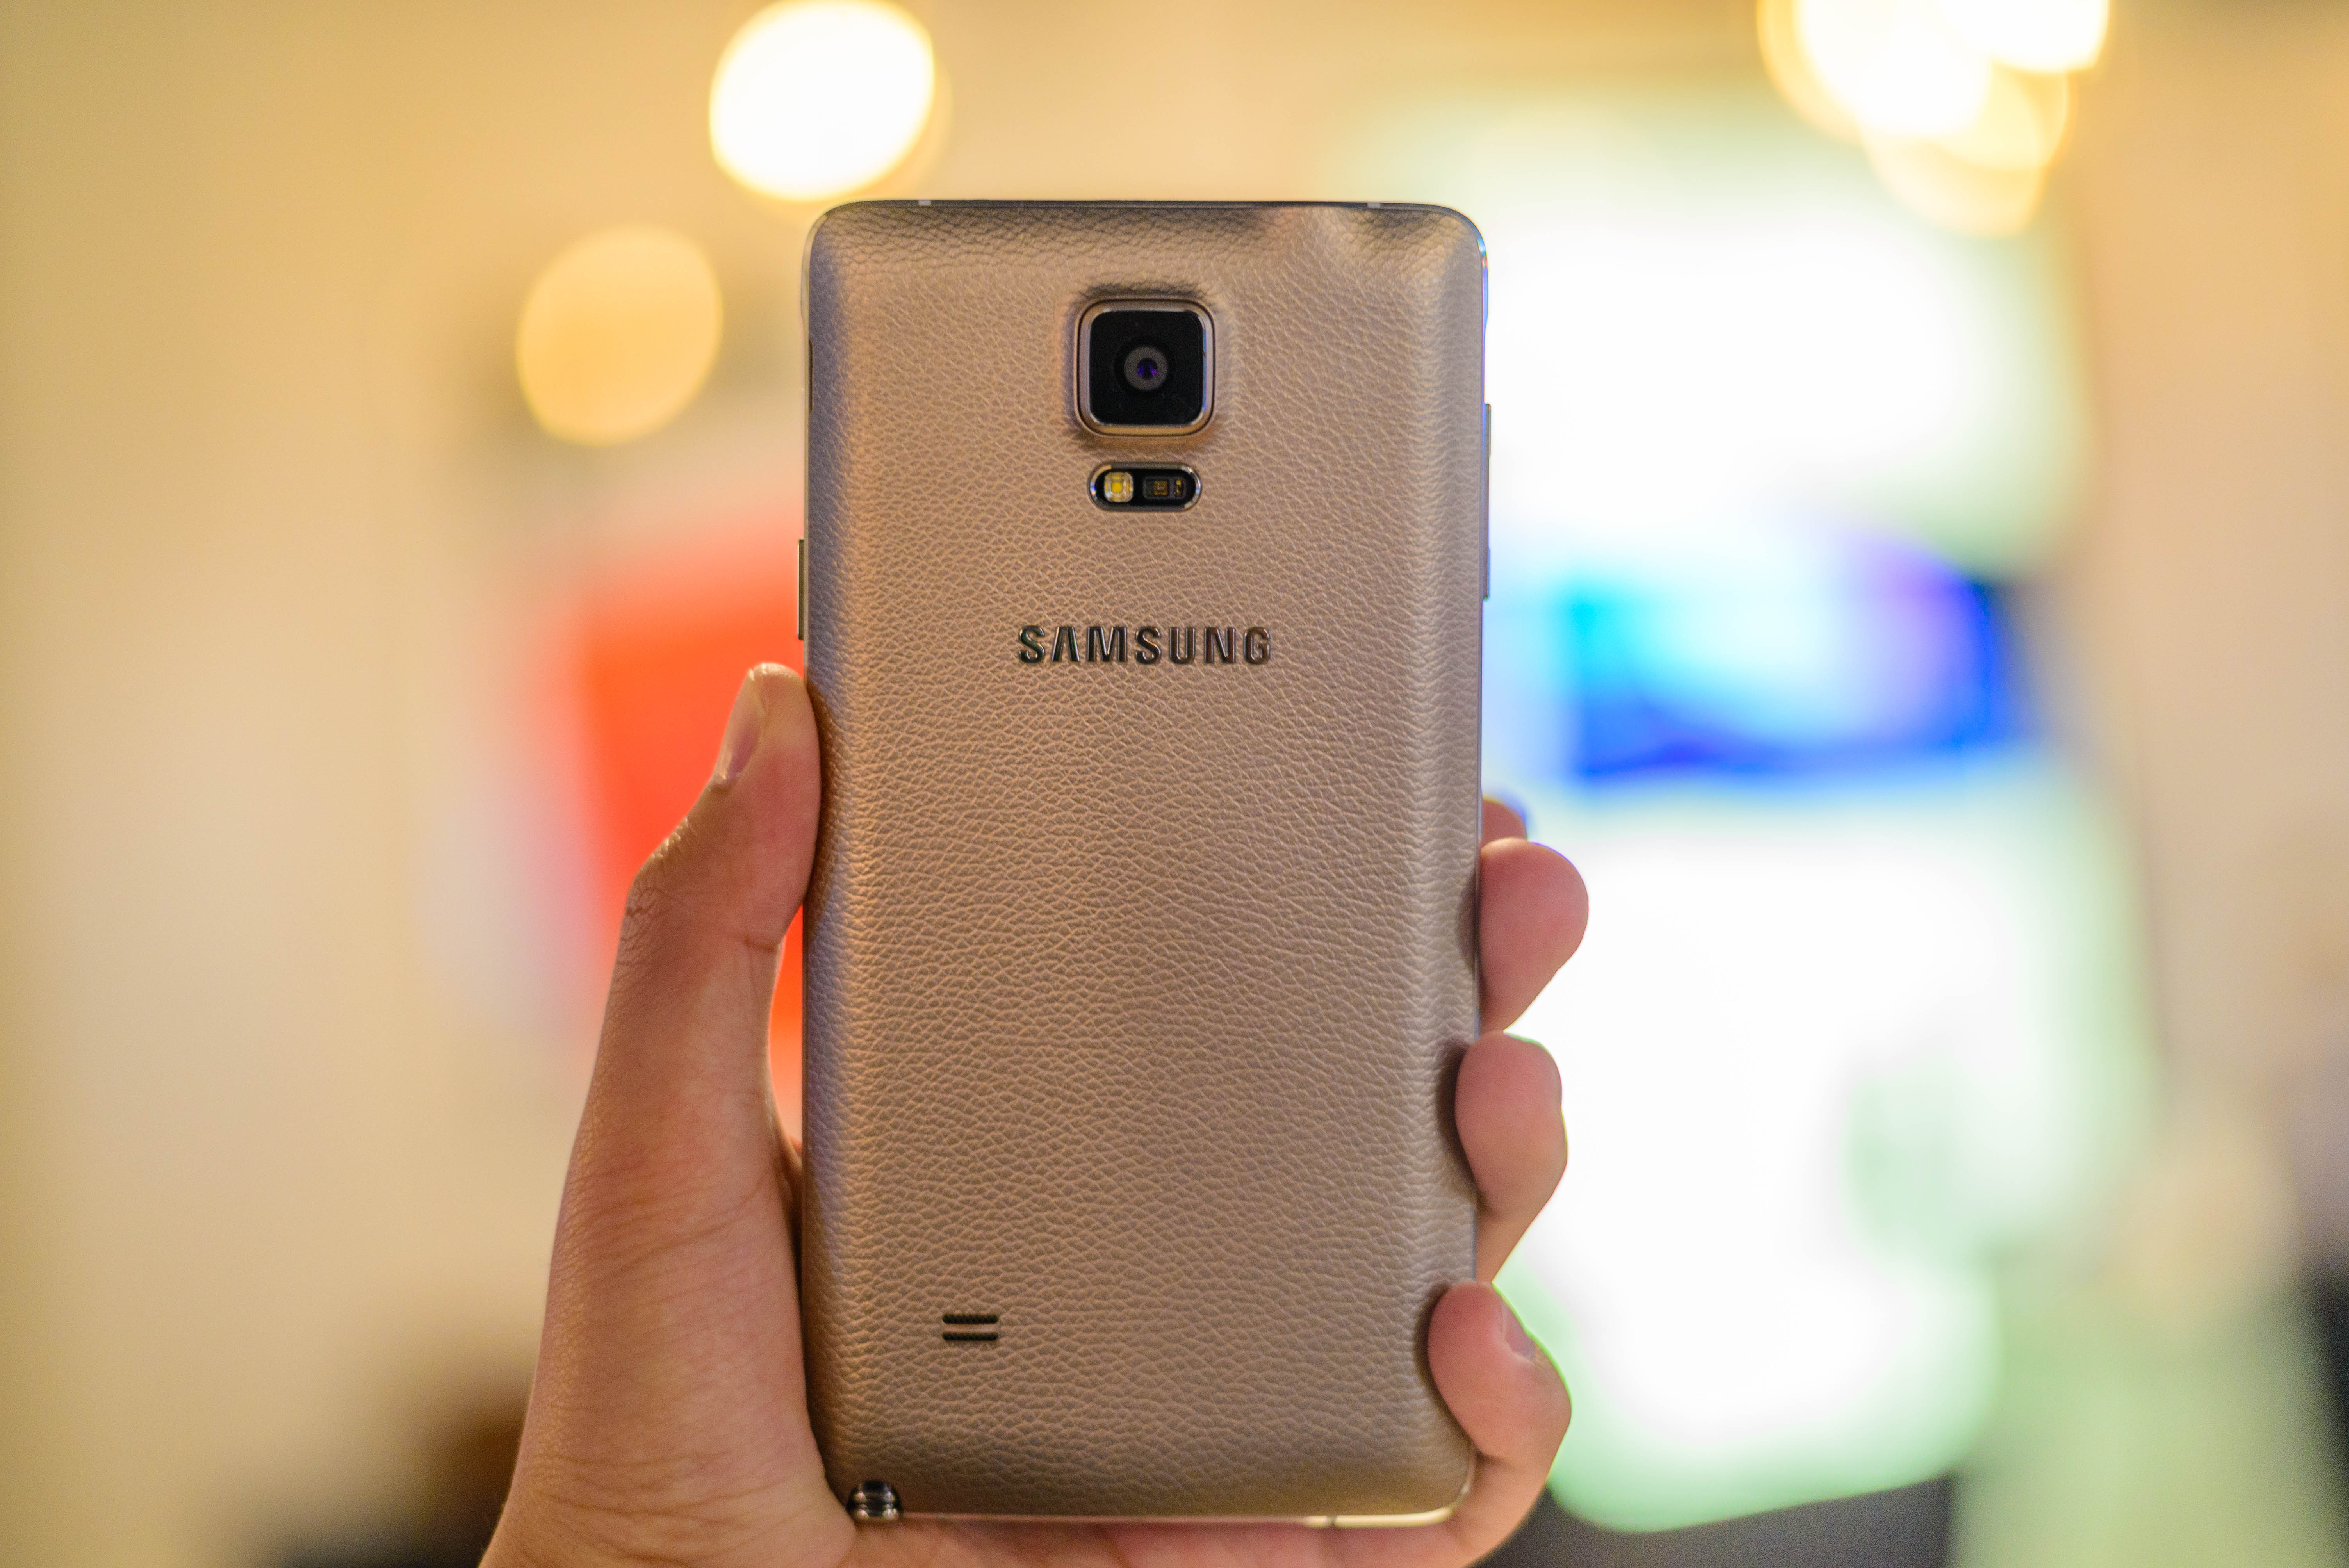 notes on galaxy note 4